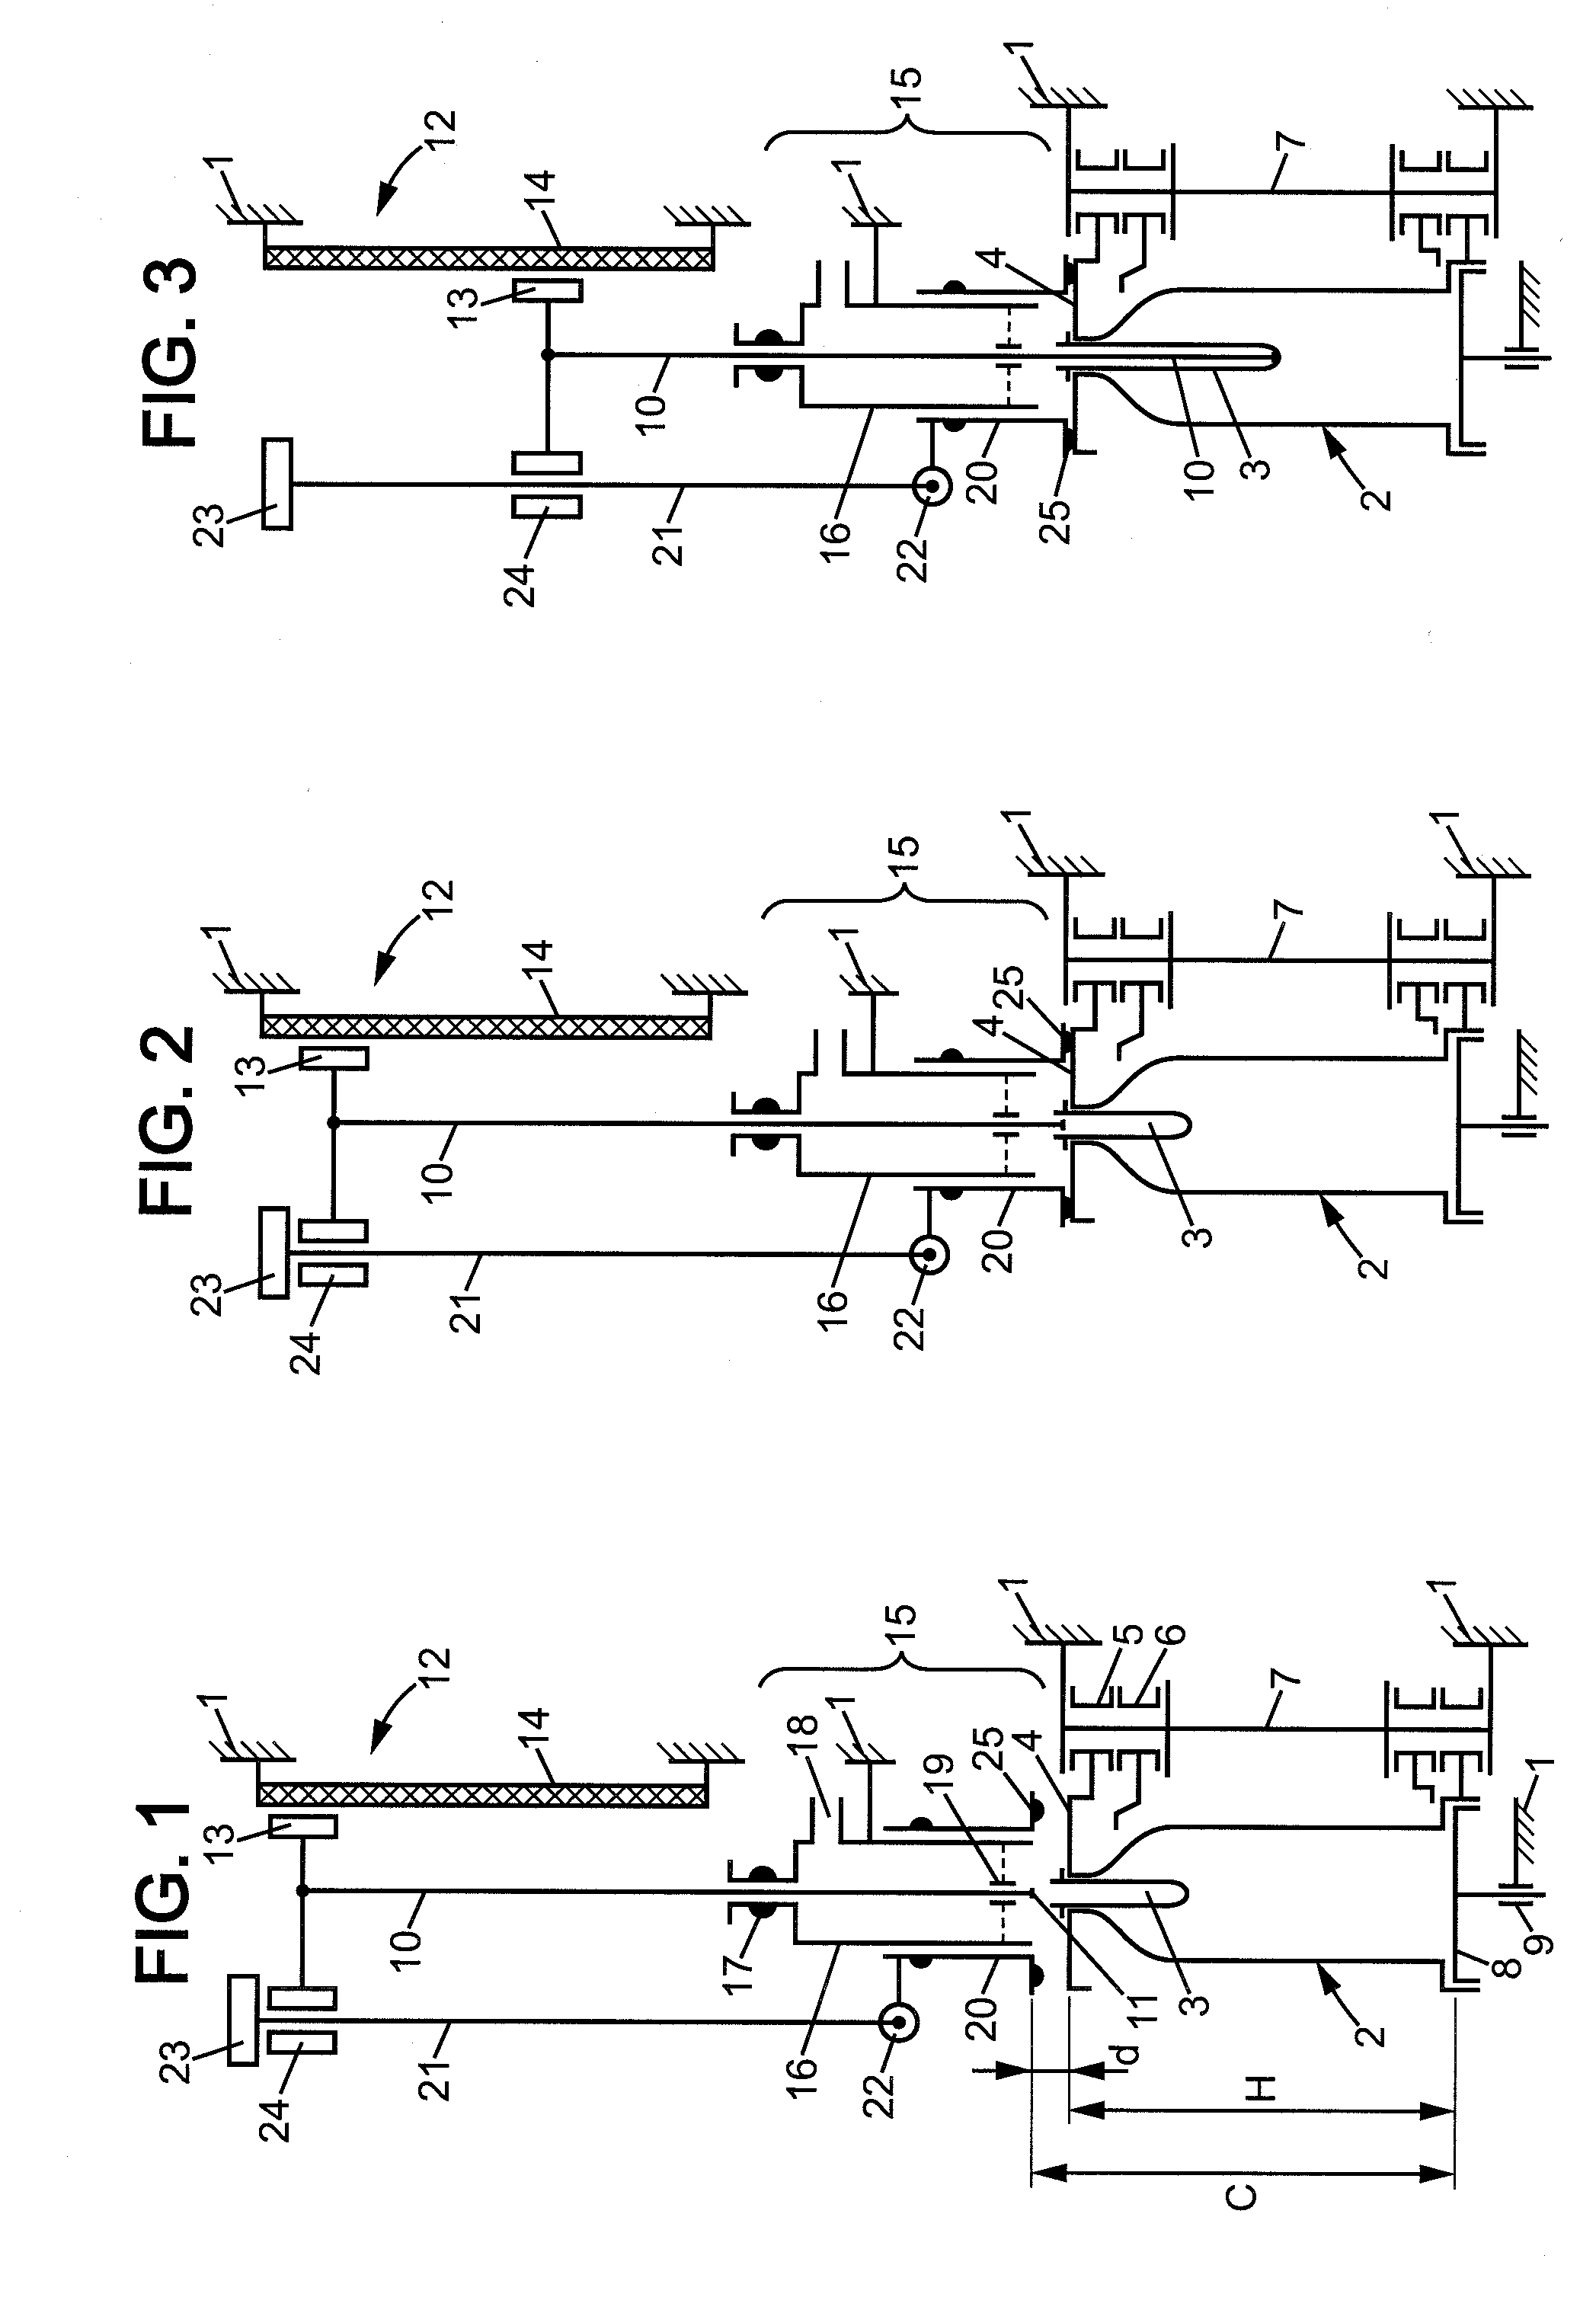 Mould carrier unit with controlled nozzle